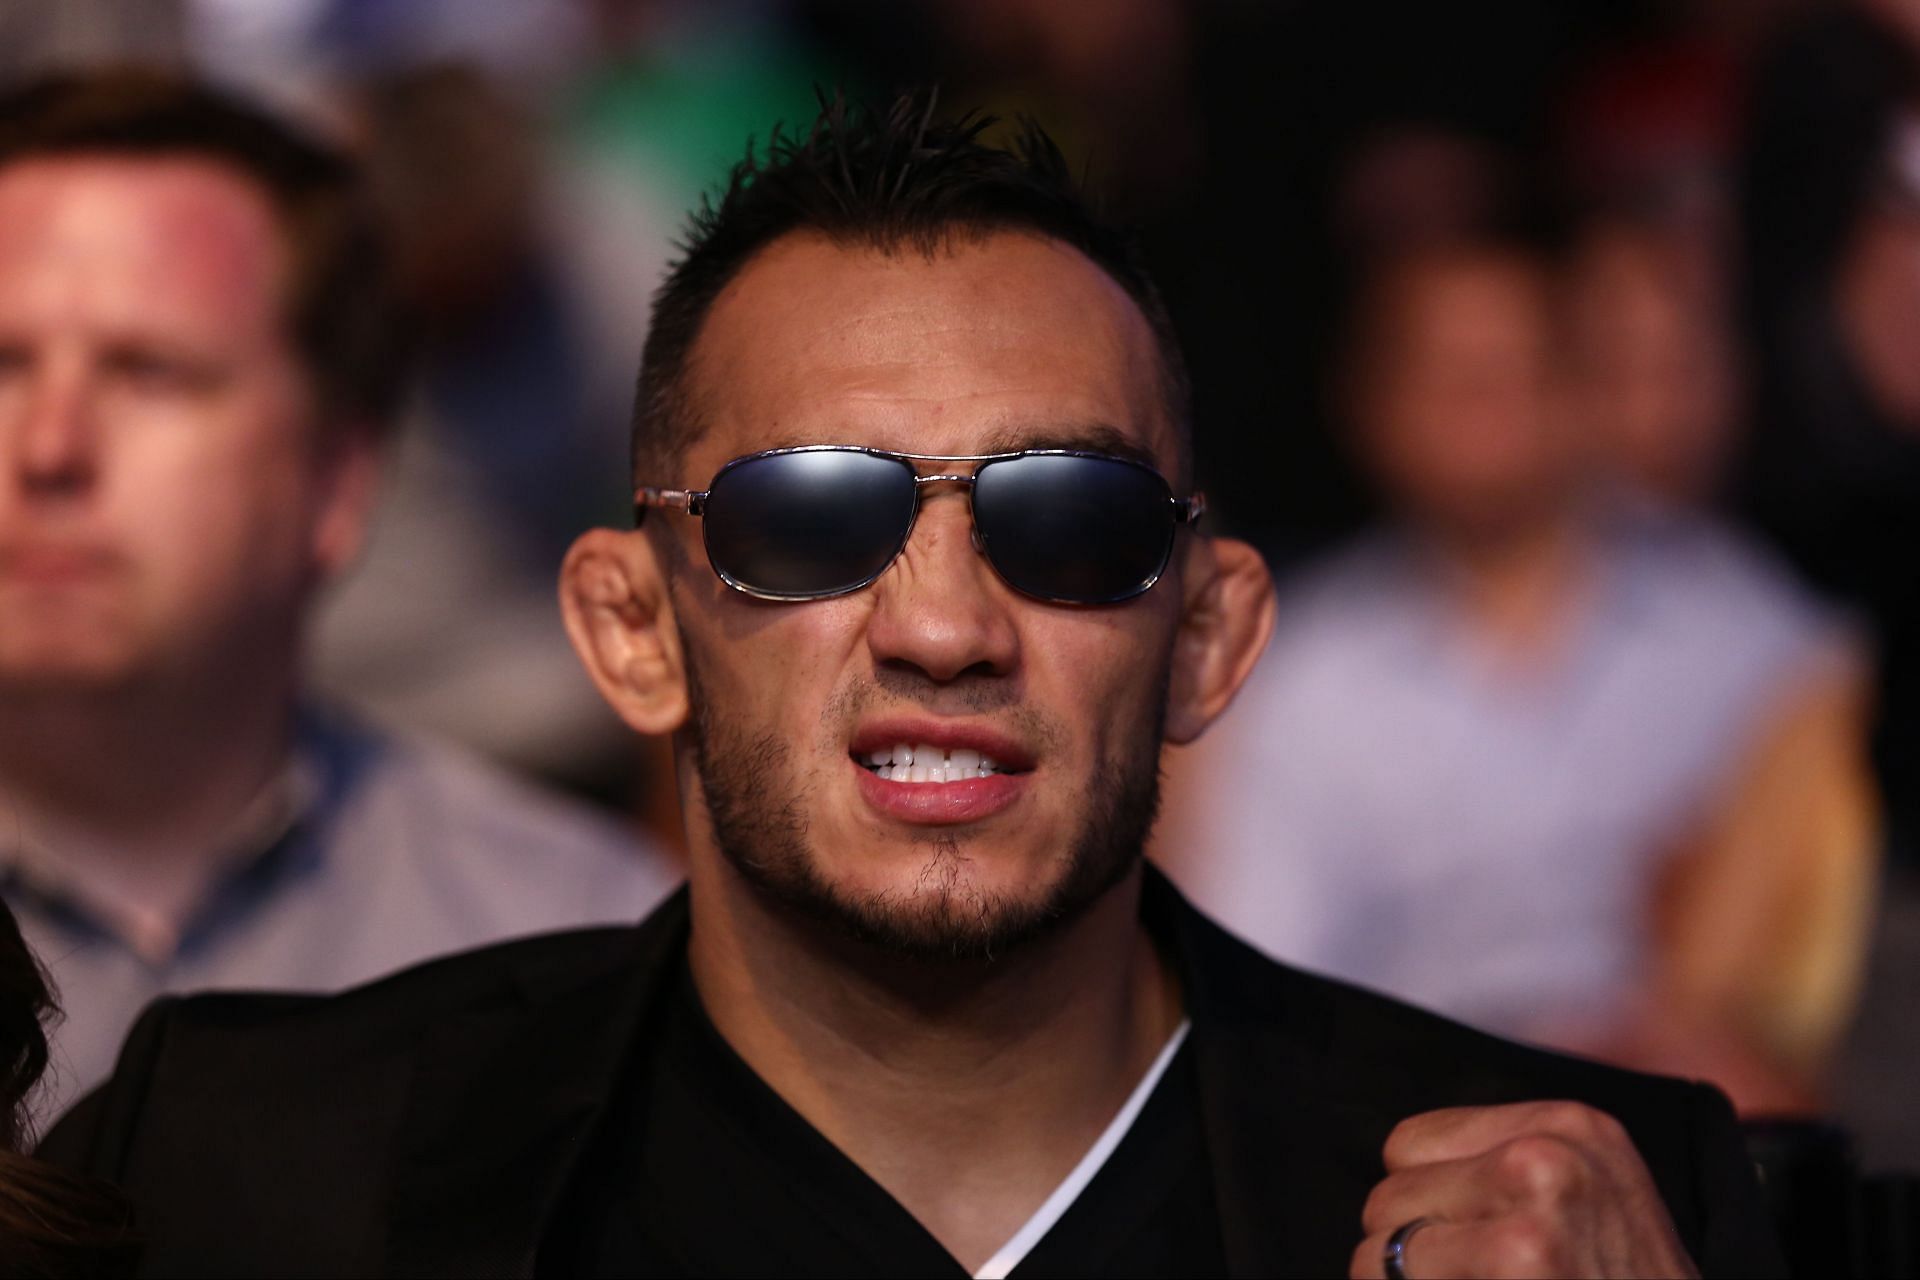 Tony Ferguson might be the perfect opponent for Conor McGregor&#039;s return bout